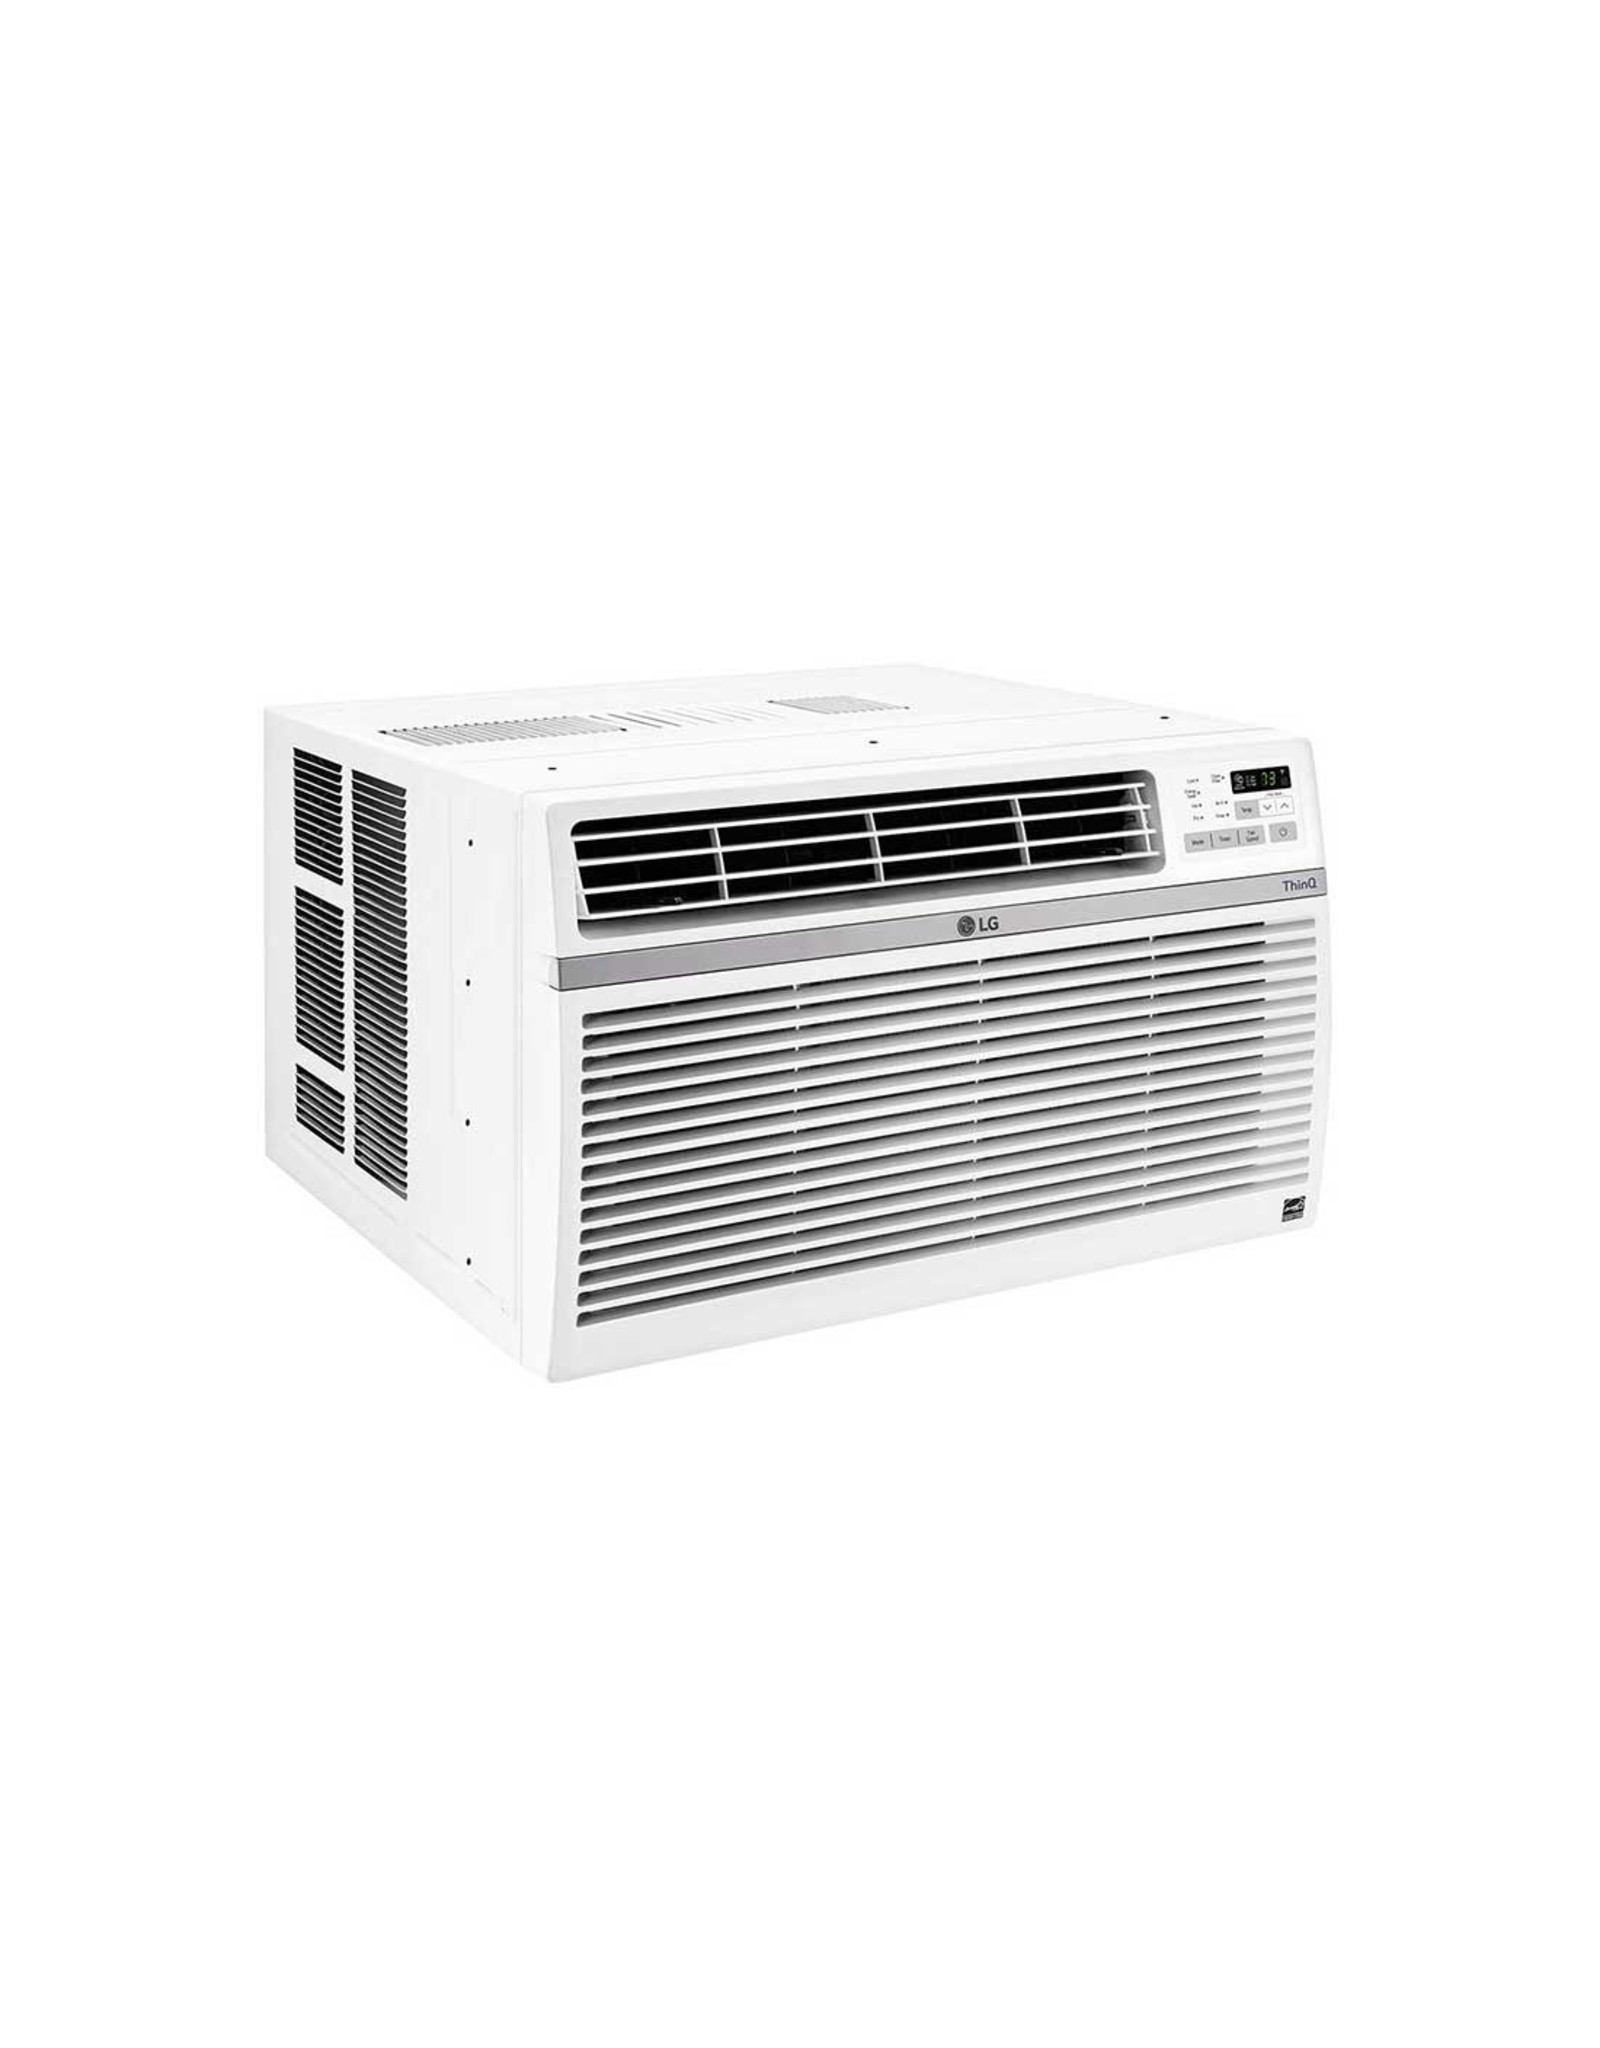 LG Electronics 10,000 BTU Window Smart (Wi-Fi) Air Conditioner with Remote, ENERGY STAR in White